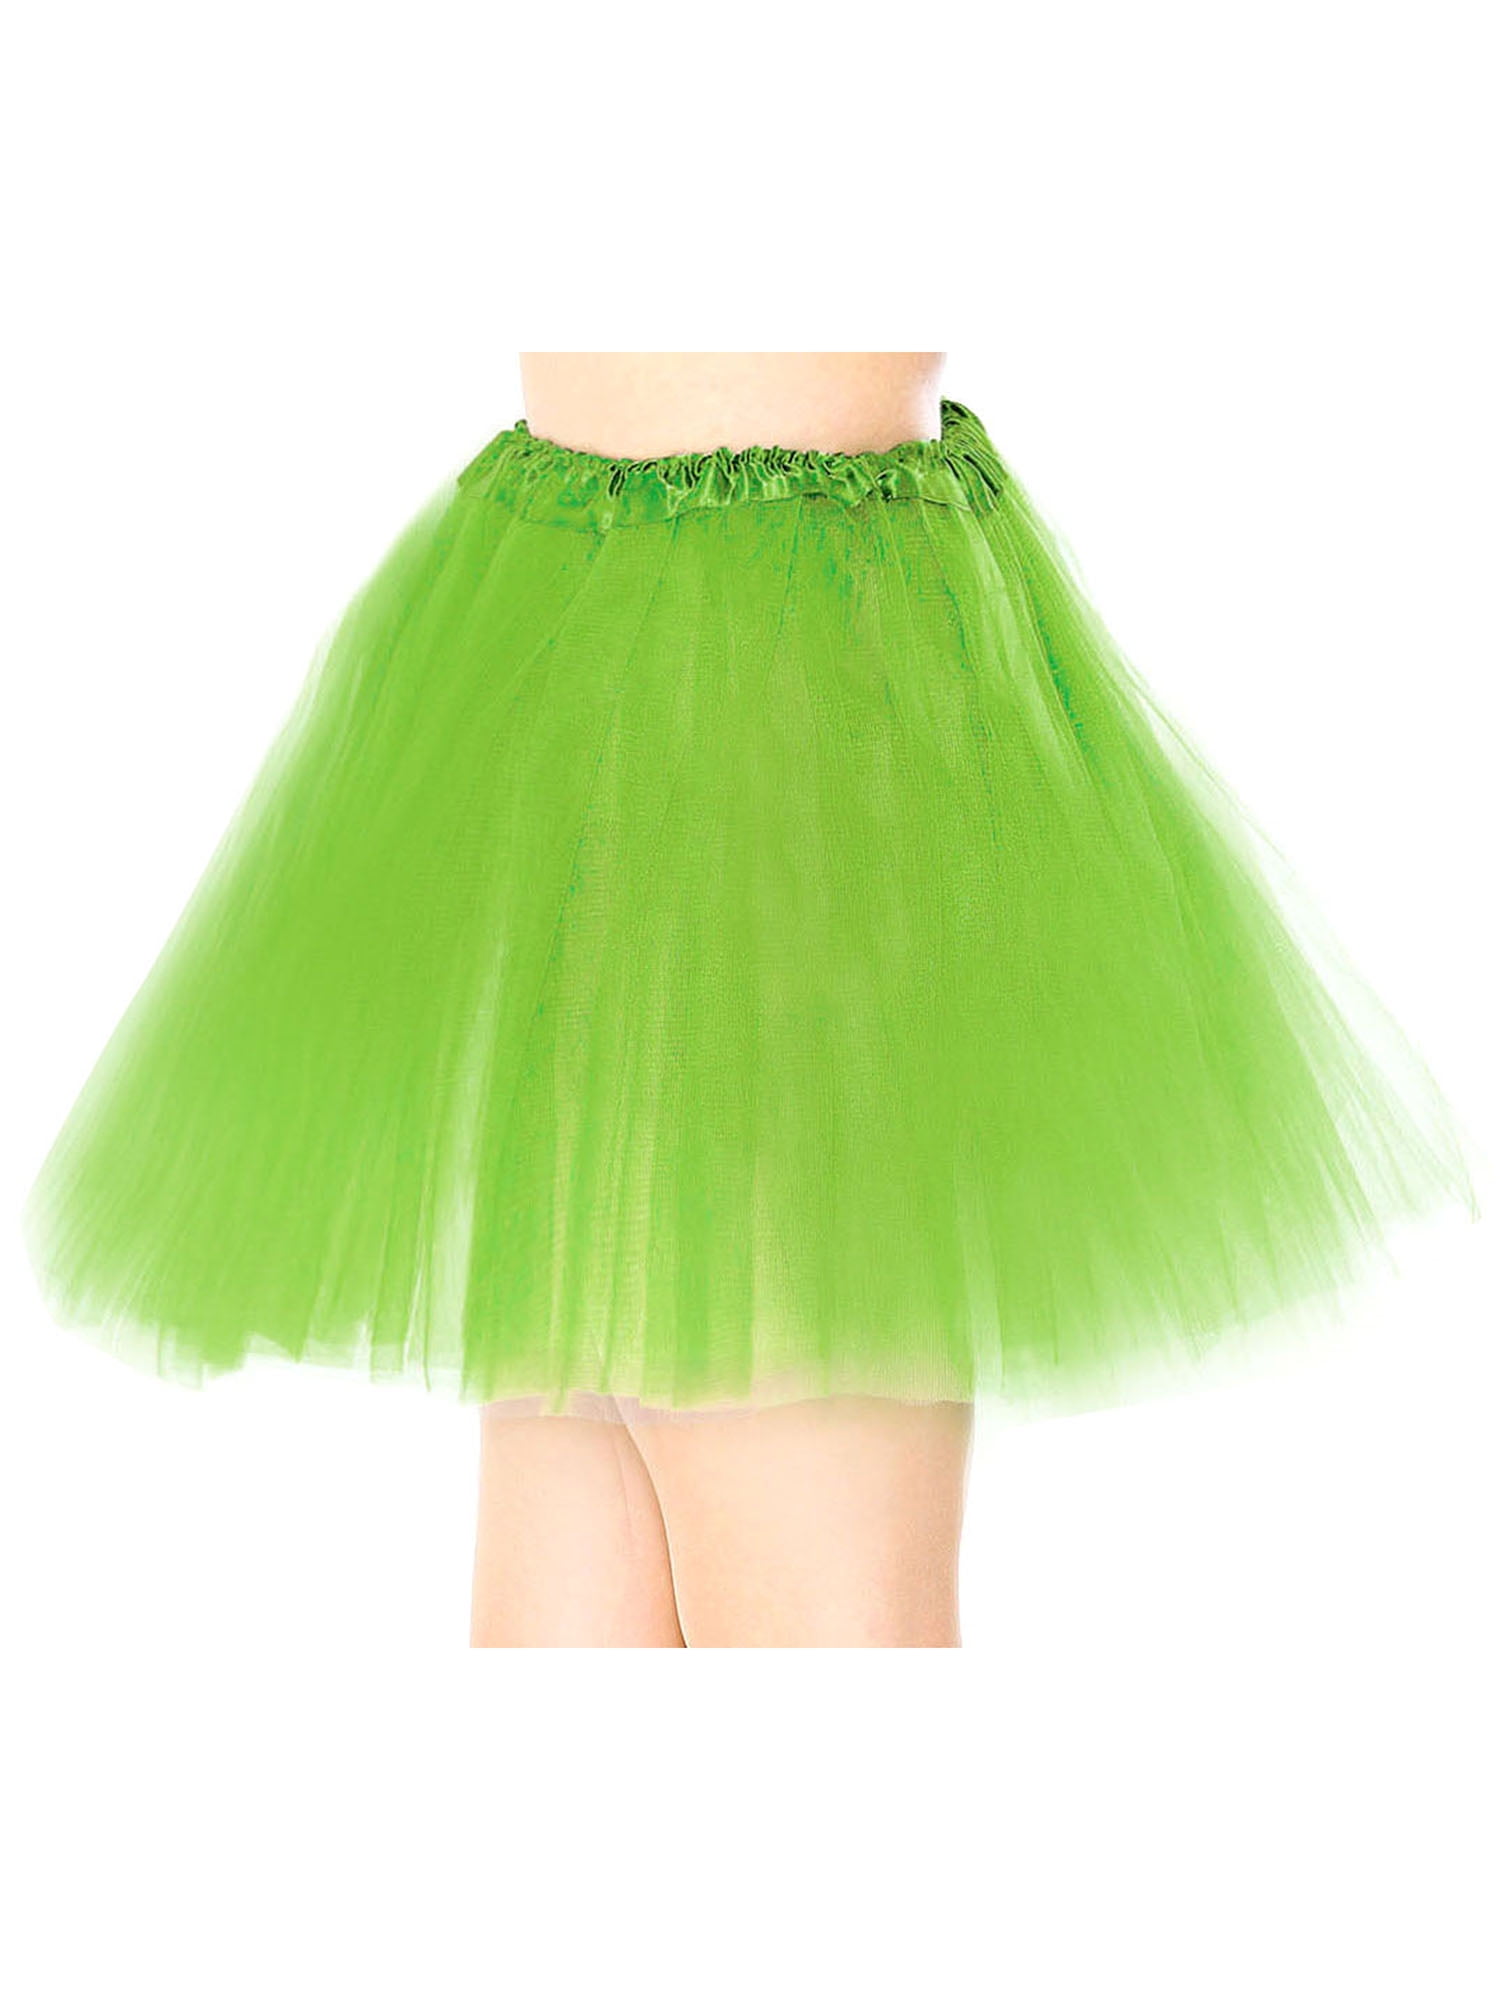 Tutu Girl 3Layers Skirt Accessory Neon Tulle Yellow 80 Party Skirts Fancy Dress